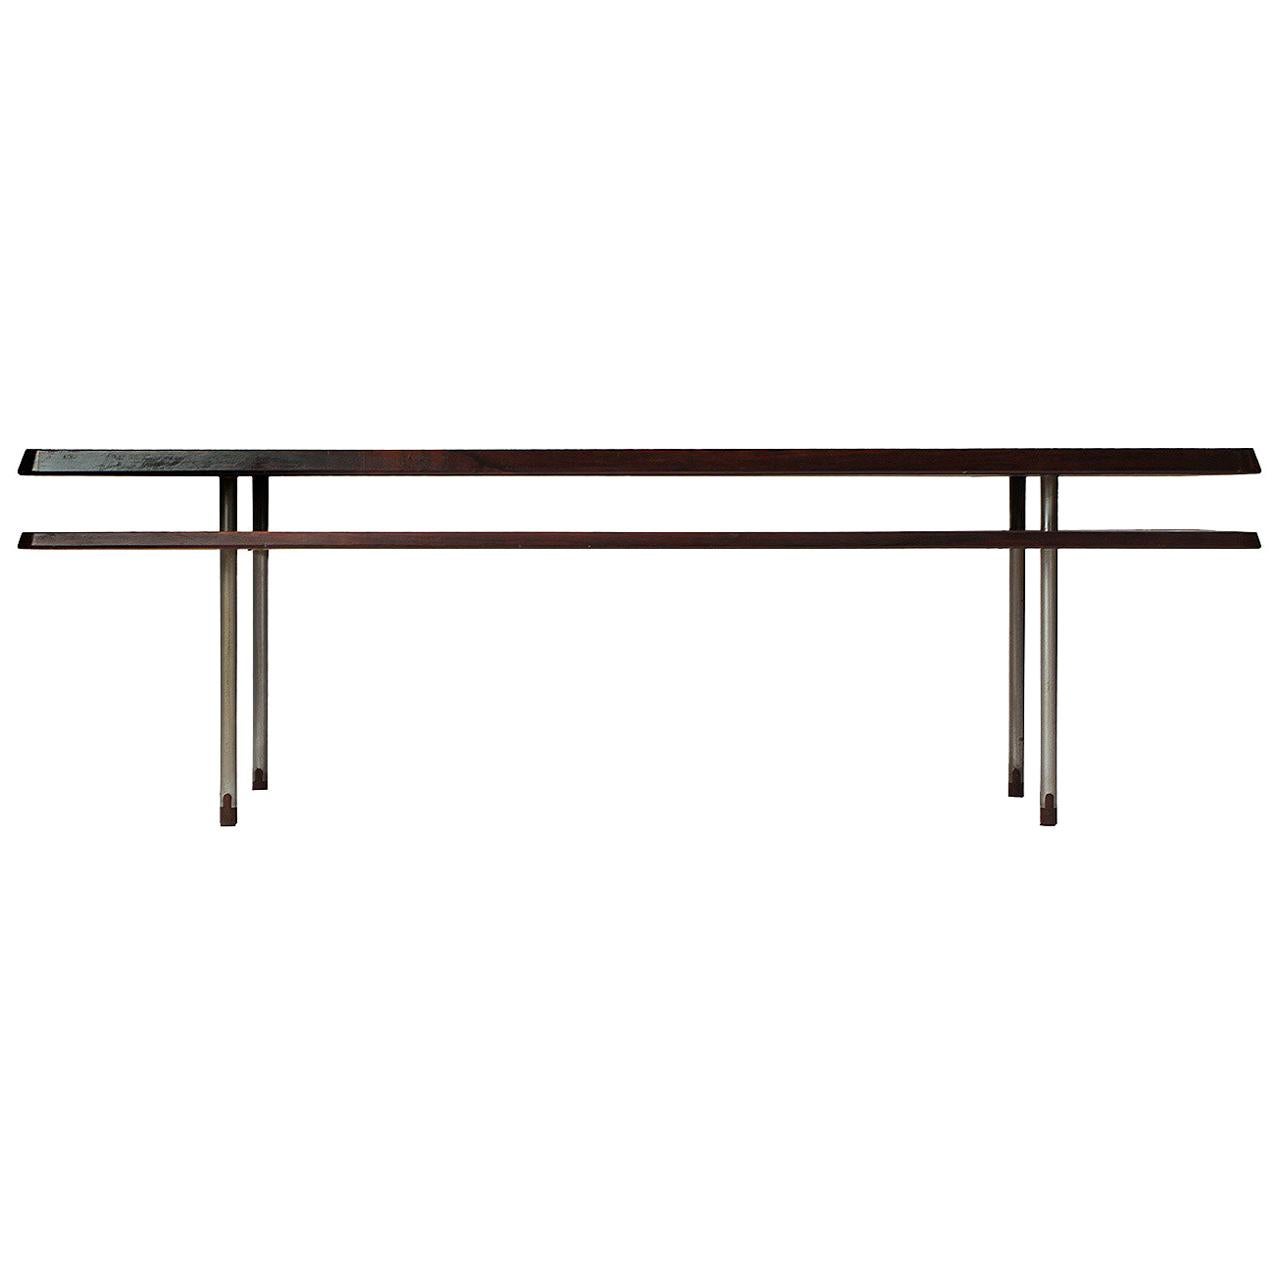 A rare and finely detailed two-tiered Scandinavian Modern table designed by Johan Hagen in highly figured rosewood with tubular rosewood-tipped brushed steel legs. Made in Denmark, circa 1950s. This table was exhibited at the Danish cabinetmakers